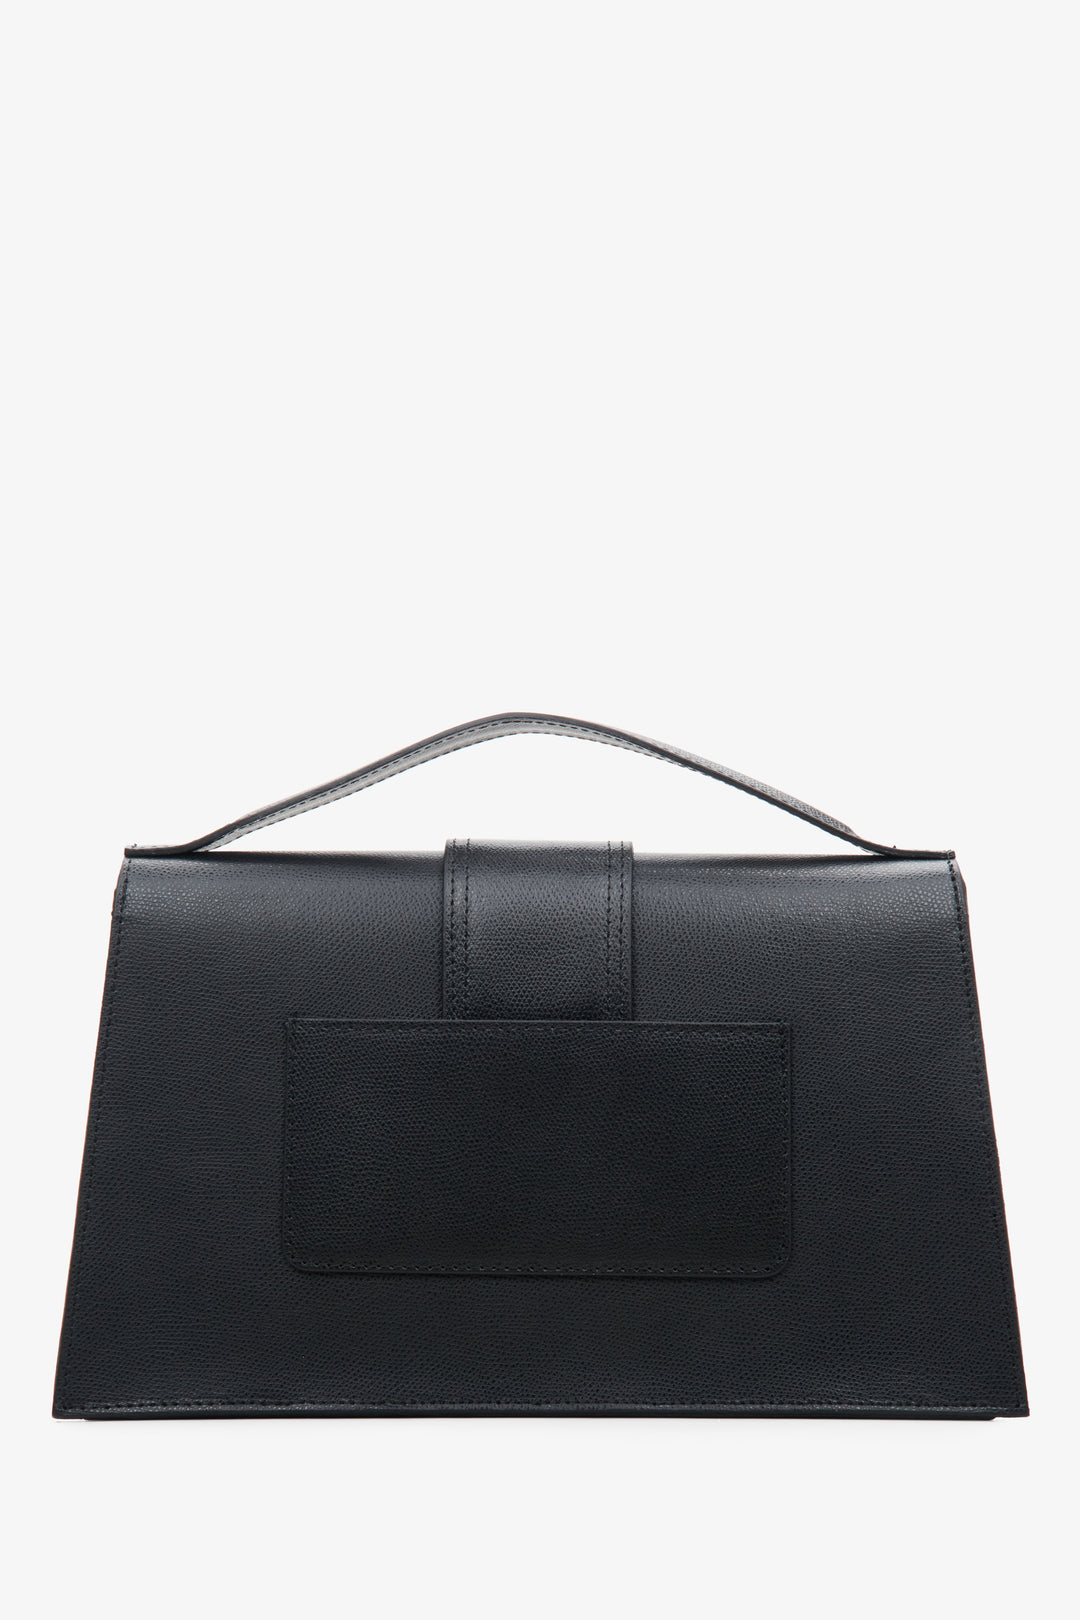 Women's black leather handbag with a flap by Estro - back view.